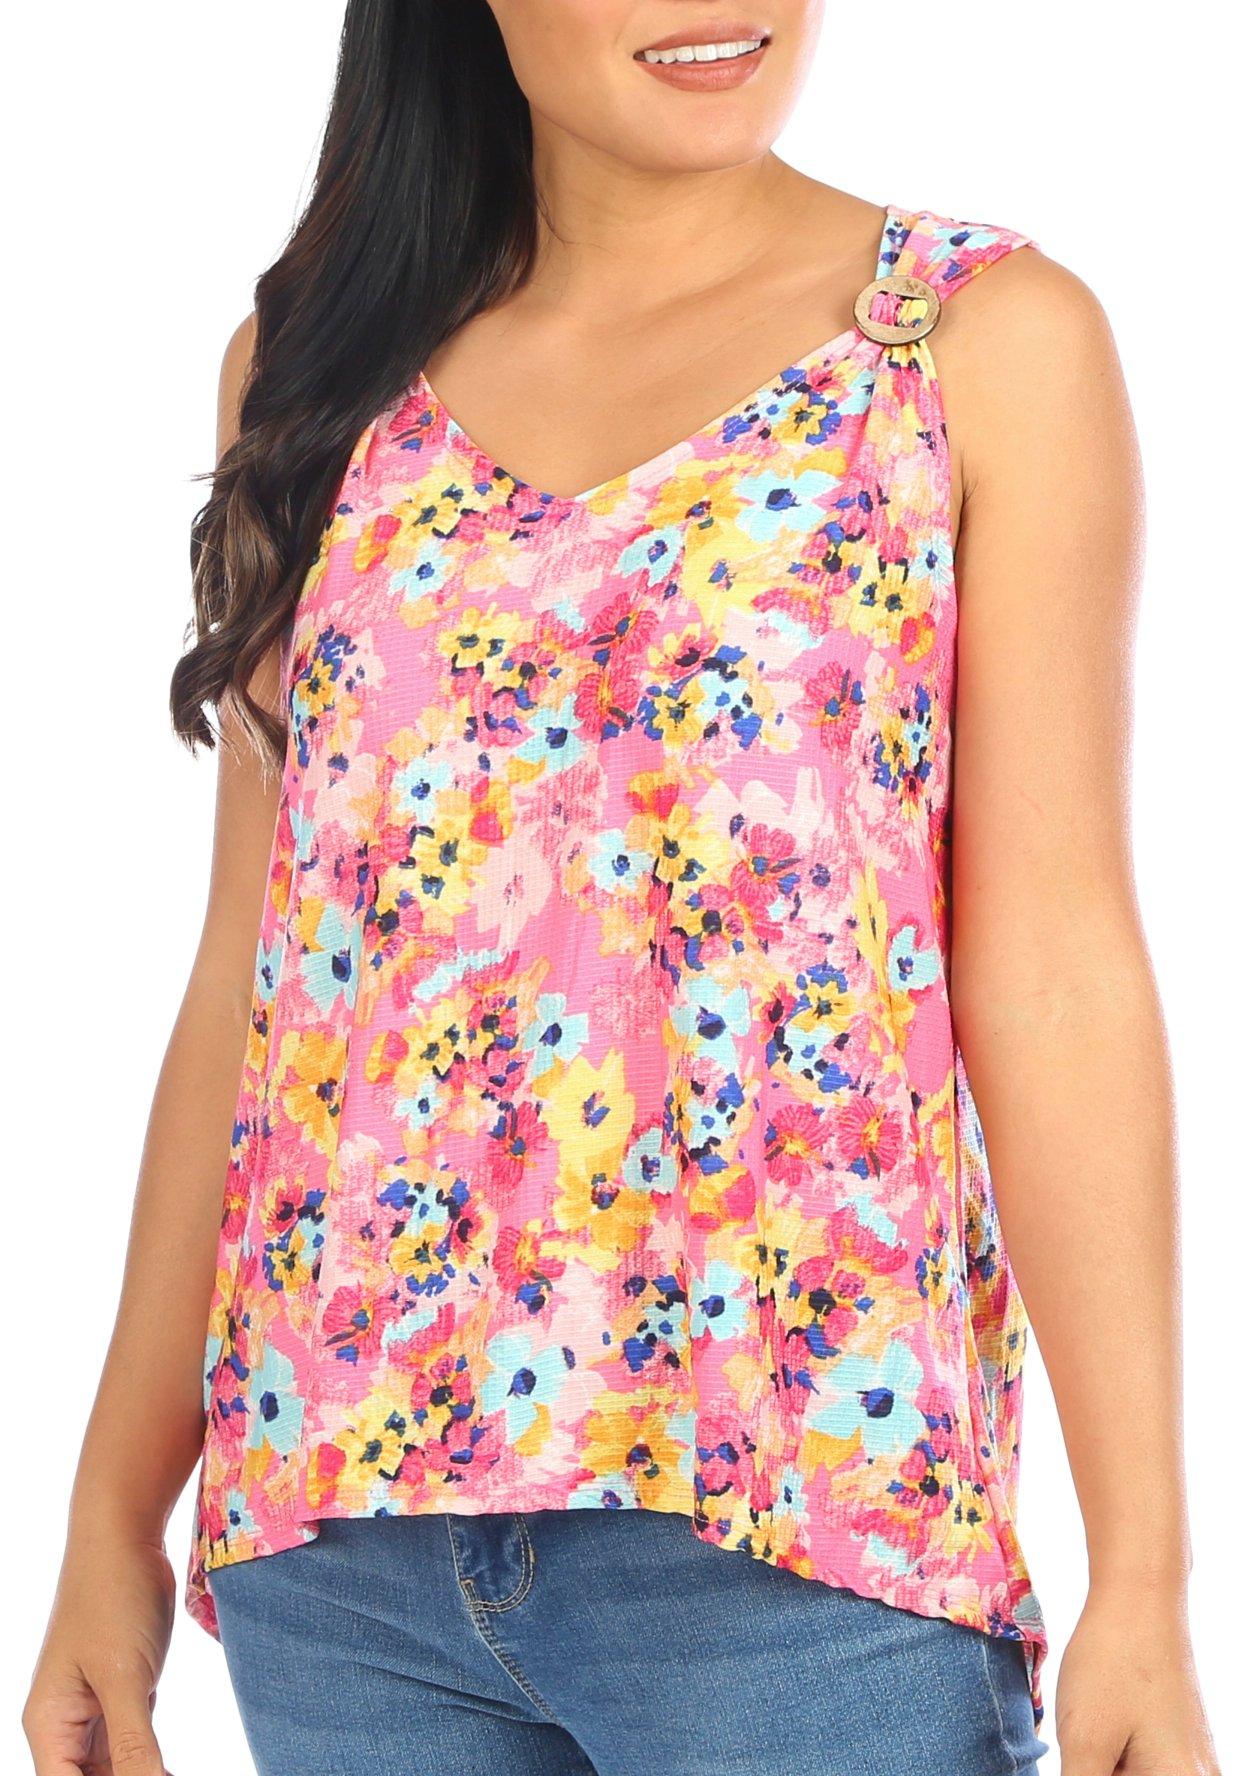 Juniper + Lime Womens Floral Coconut Ring Sleeveless